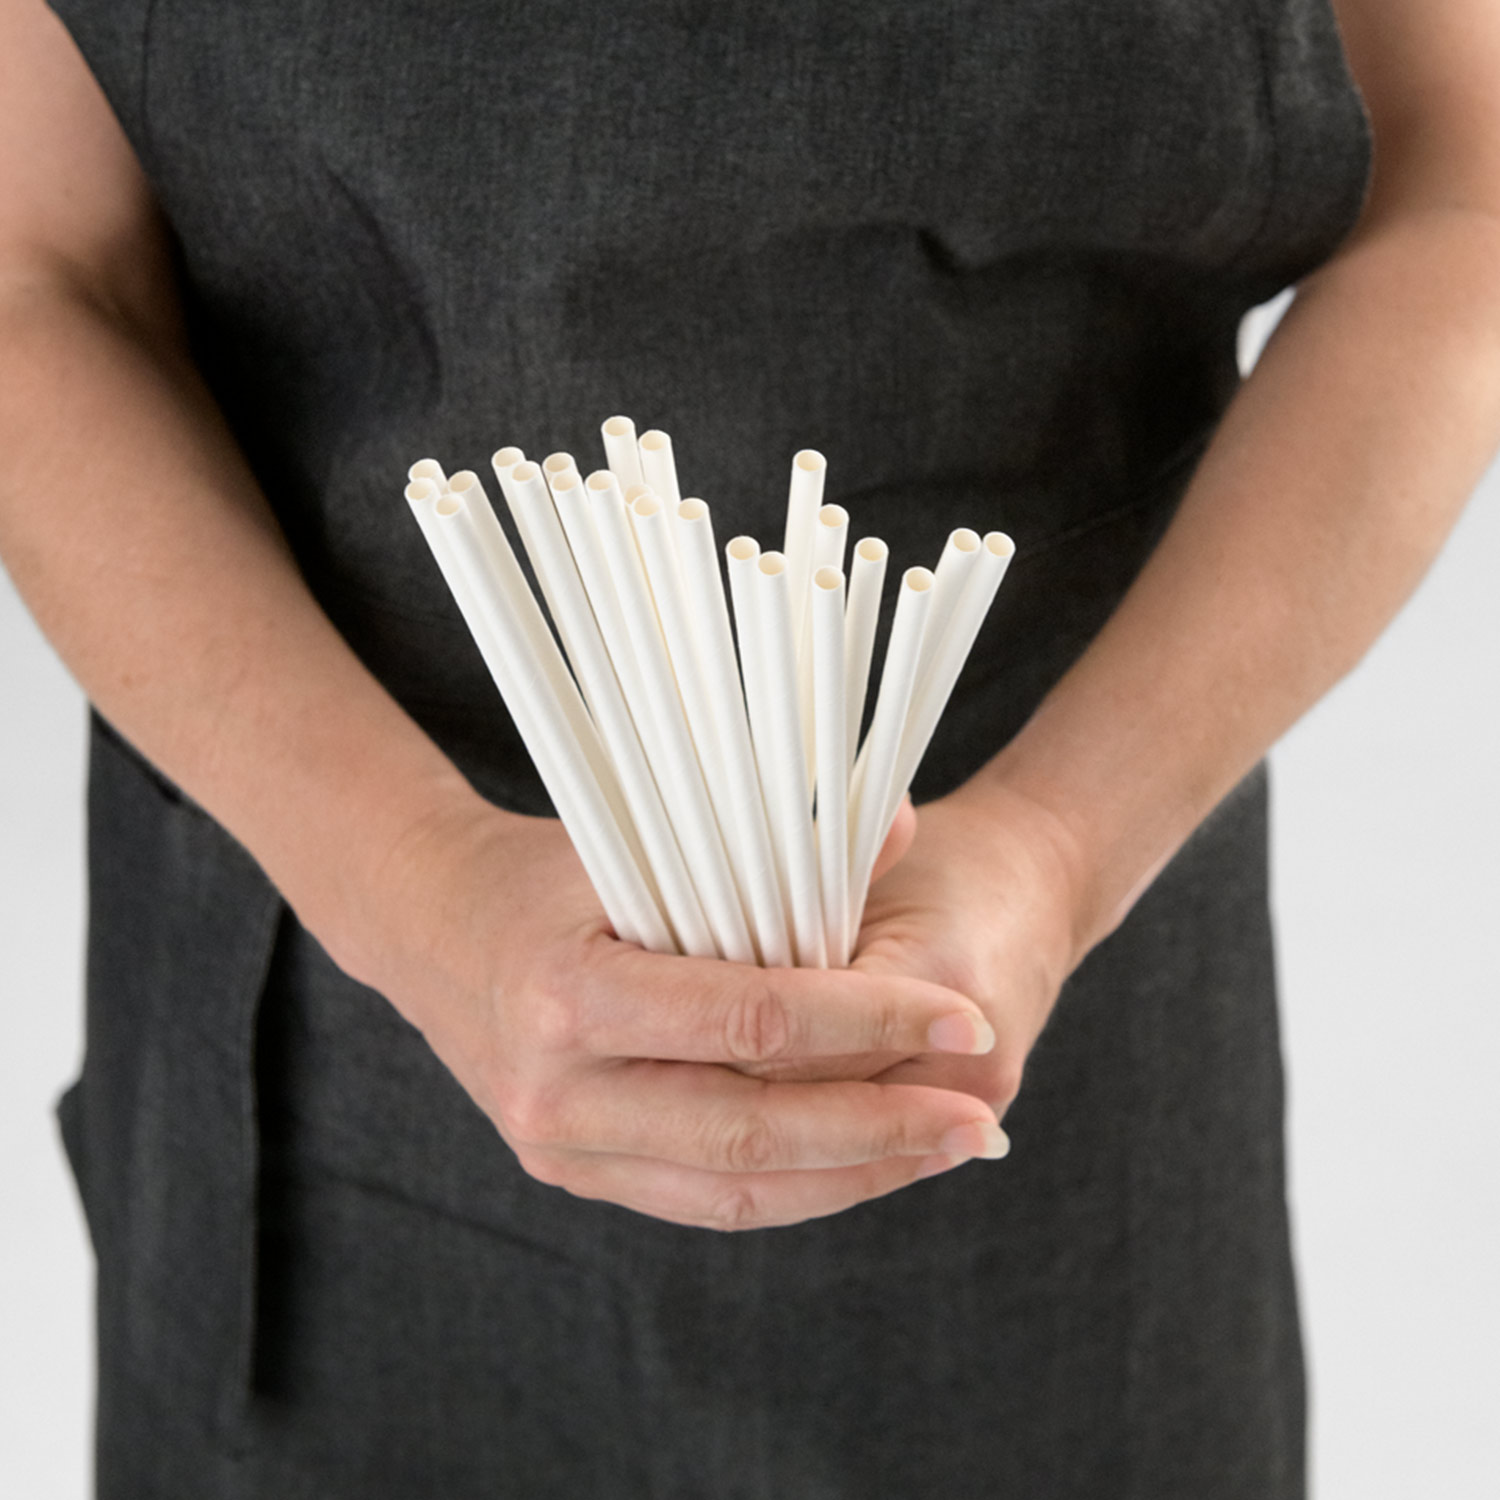 Image of paper straws as New Zealand announces it may ban plastic straws